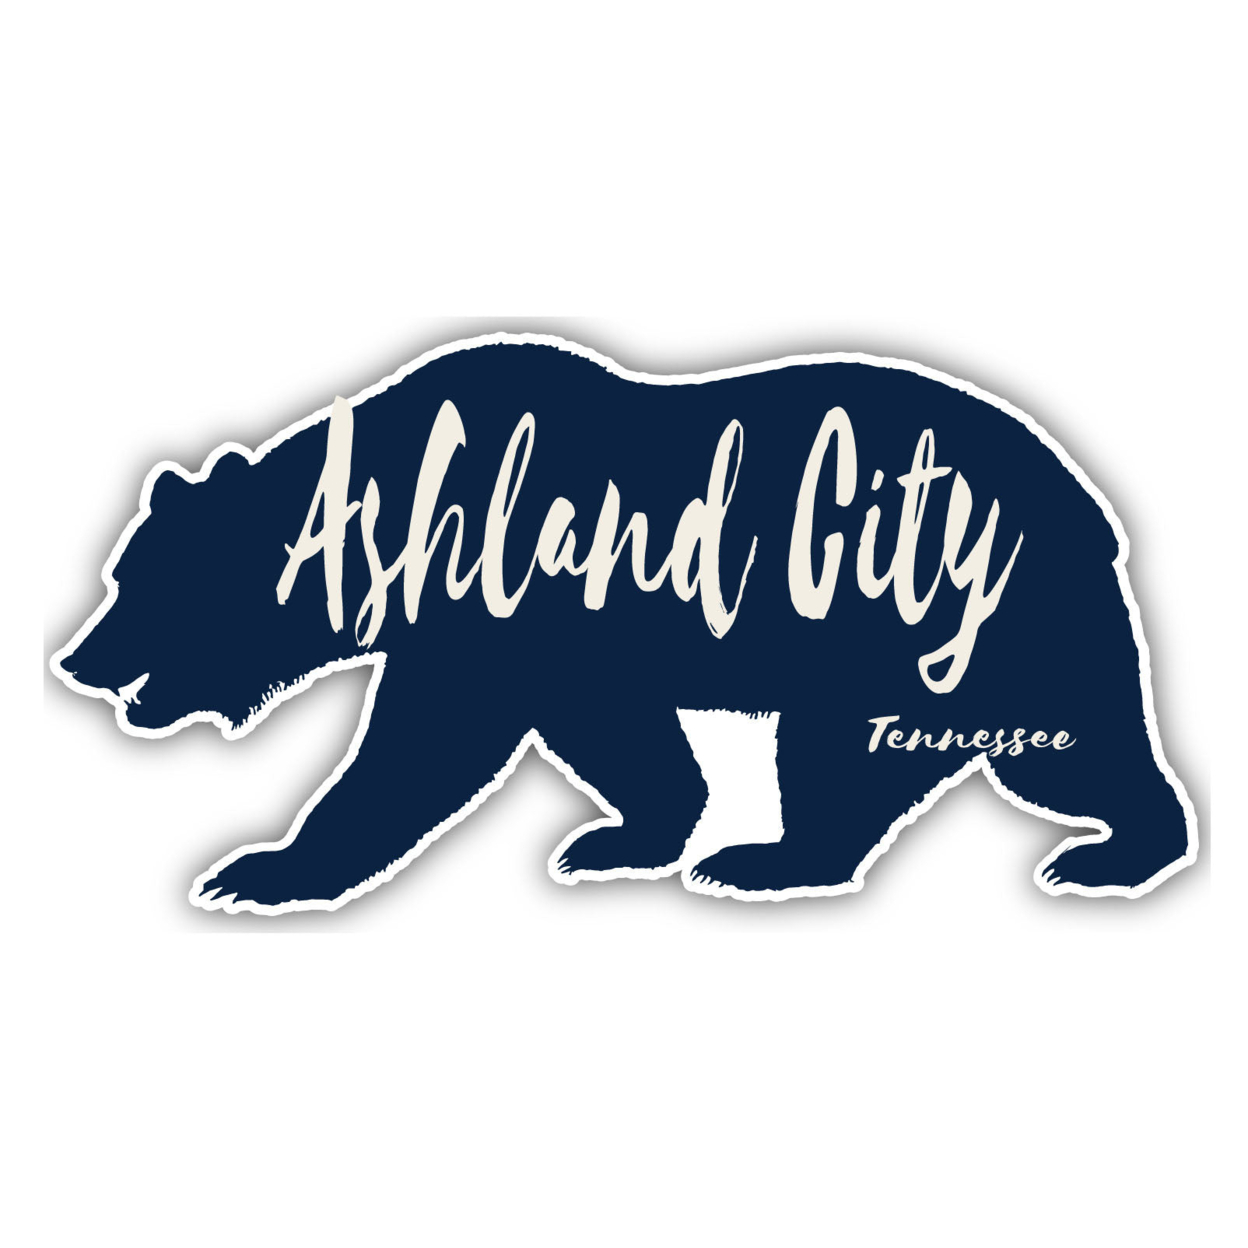 Ashland City Tennessee Souvenir Decorative Stickers (Choose Theme And Size) - 4-Pack, 4-Inch, Bear